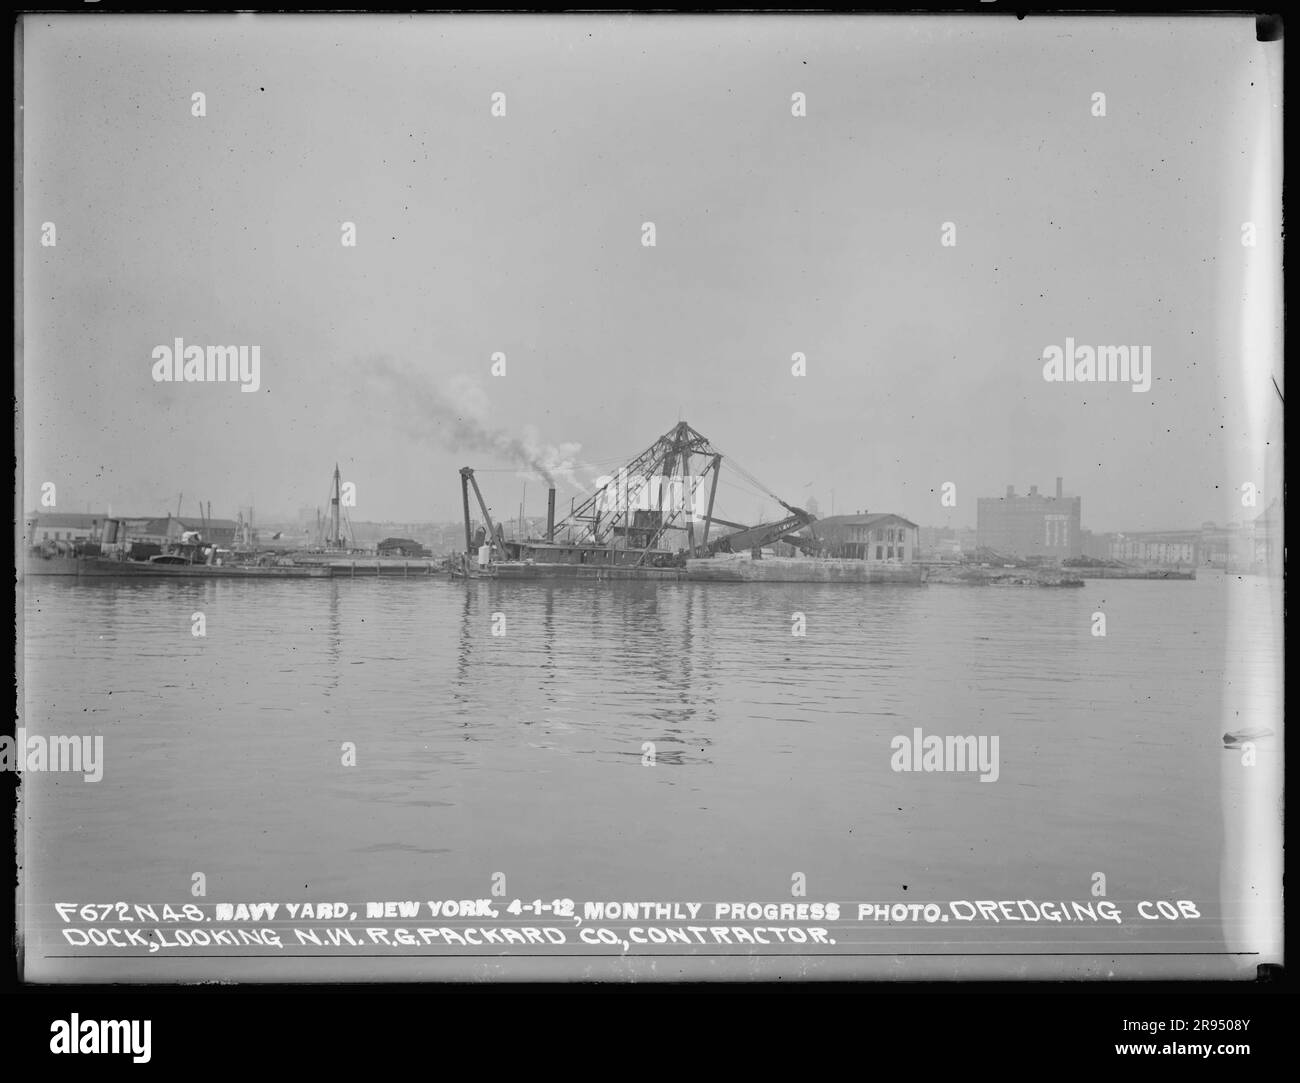 Monthly Progress Photo, Dredging Cob Dock, Looking Northwest, R. G. Packard Company, Contractor. Glass Plate Negatives of the Construction and Repair of Buildings, Facilities, and Vessels at the New York Navy Yard. Stock Photo